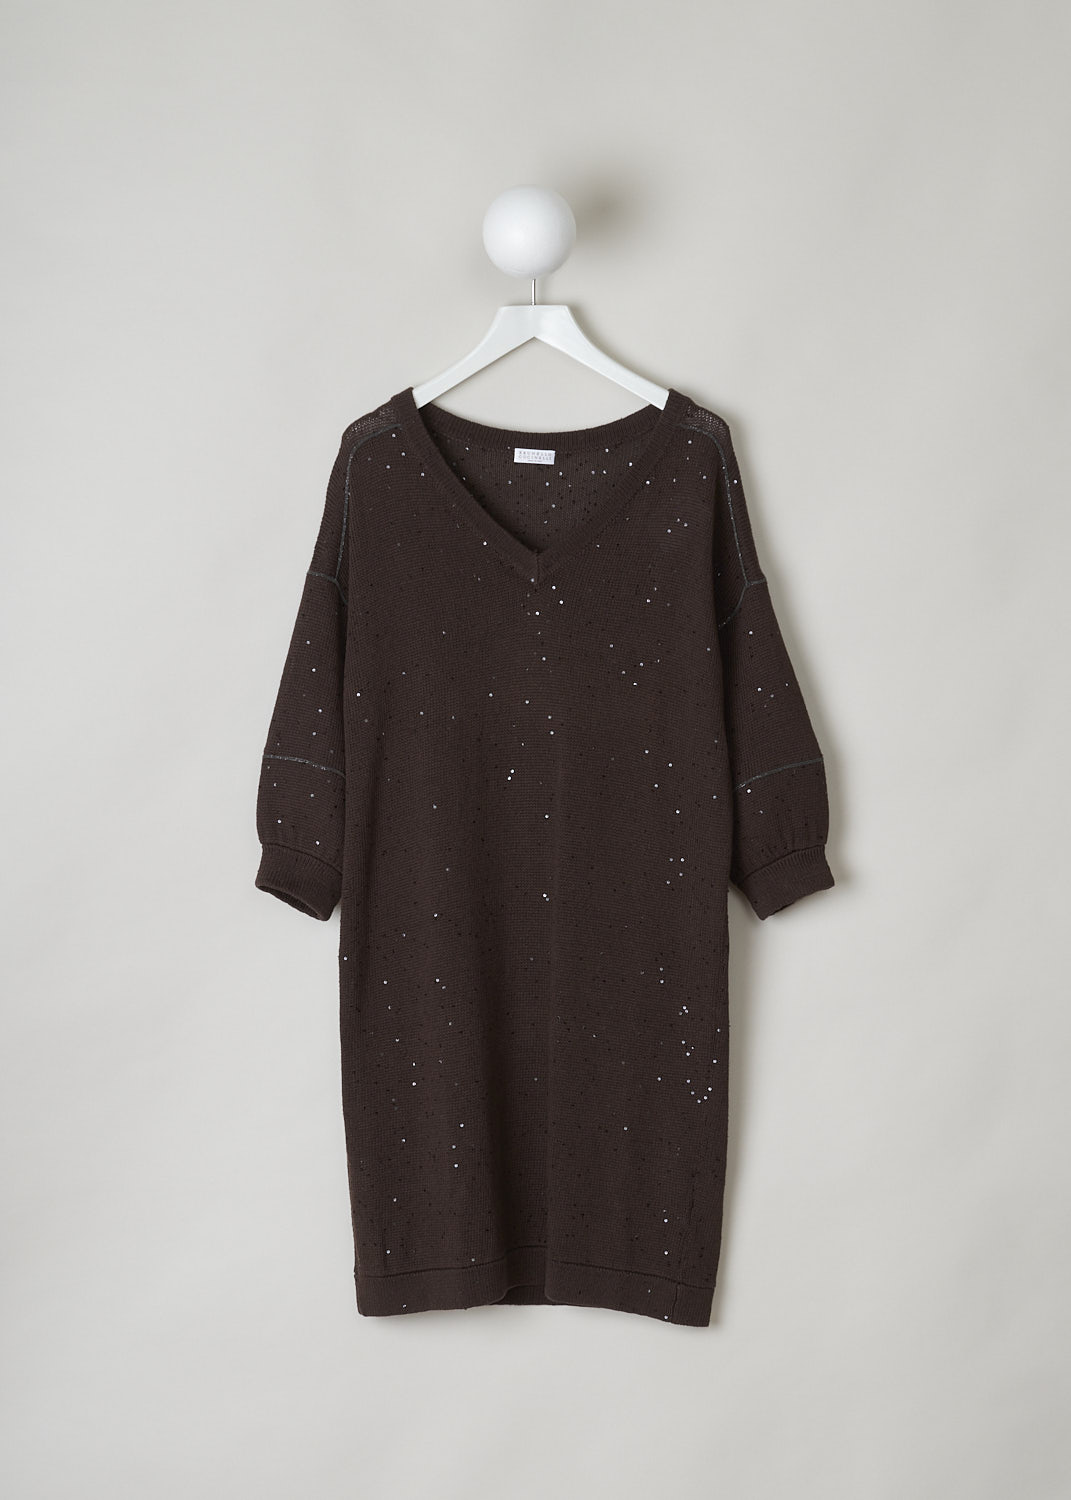 BRUNELLO CUCINELLI, WARM BROWN SWEATER DRESS WITH SEQUINS, Brown, Front, This warm brown knitted sweater dress has a V-neckline, dropped shoulders and three-quarter sleeves. The neckline, cuffs and hemline have a ribbed finish. The dress has sequins sewn in throughout and along the shoulders and across the sleeves, monili beaded strips can be found. The dress has a wider silhouette.  
